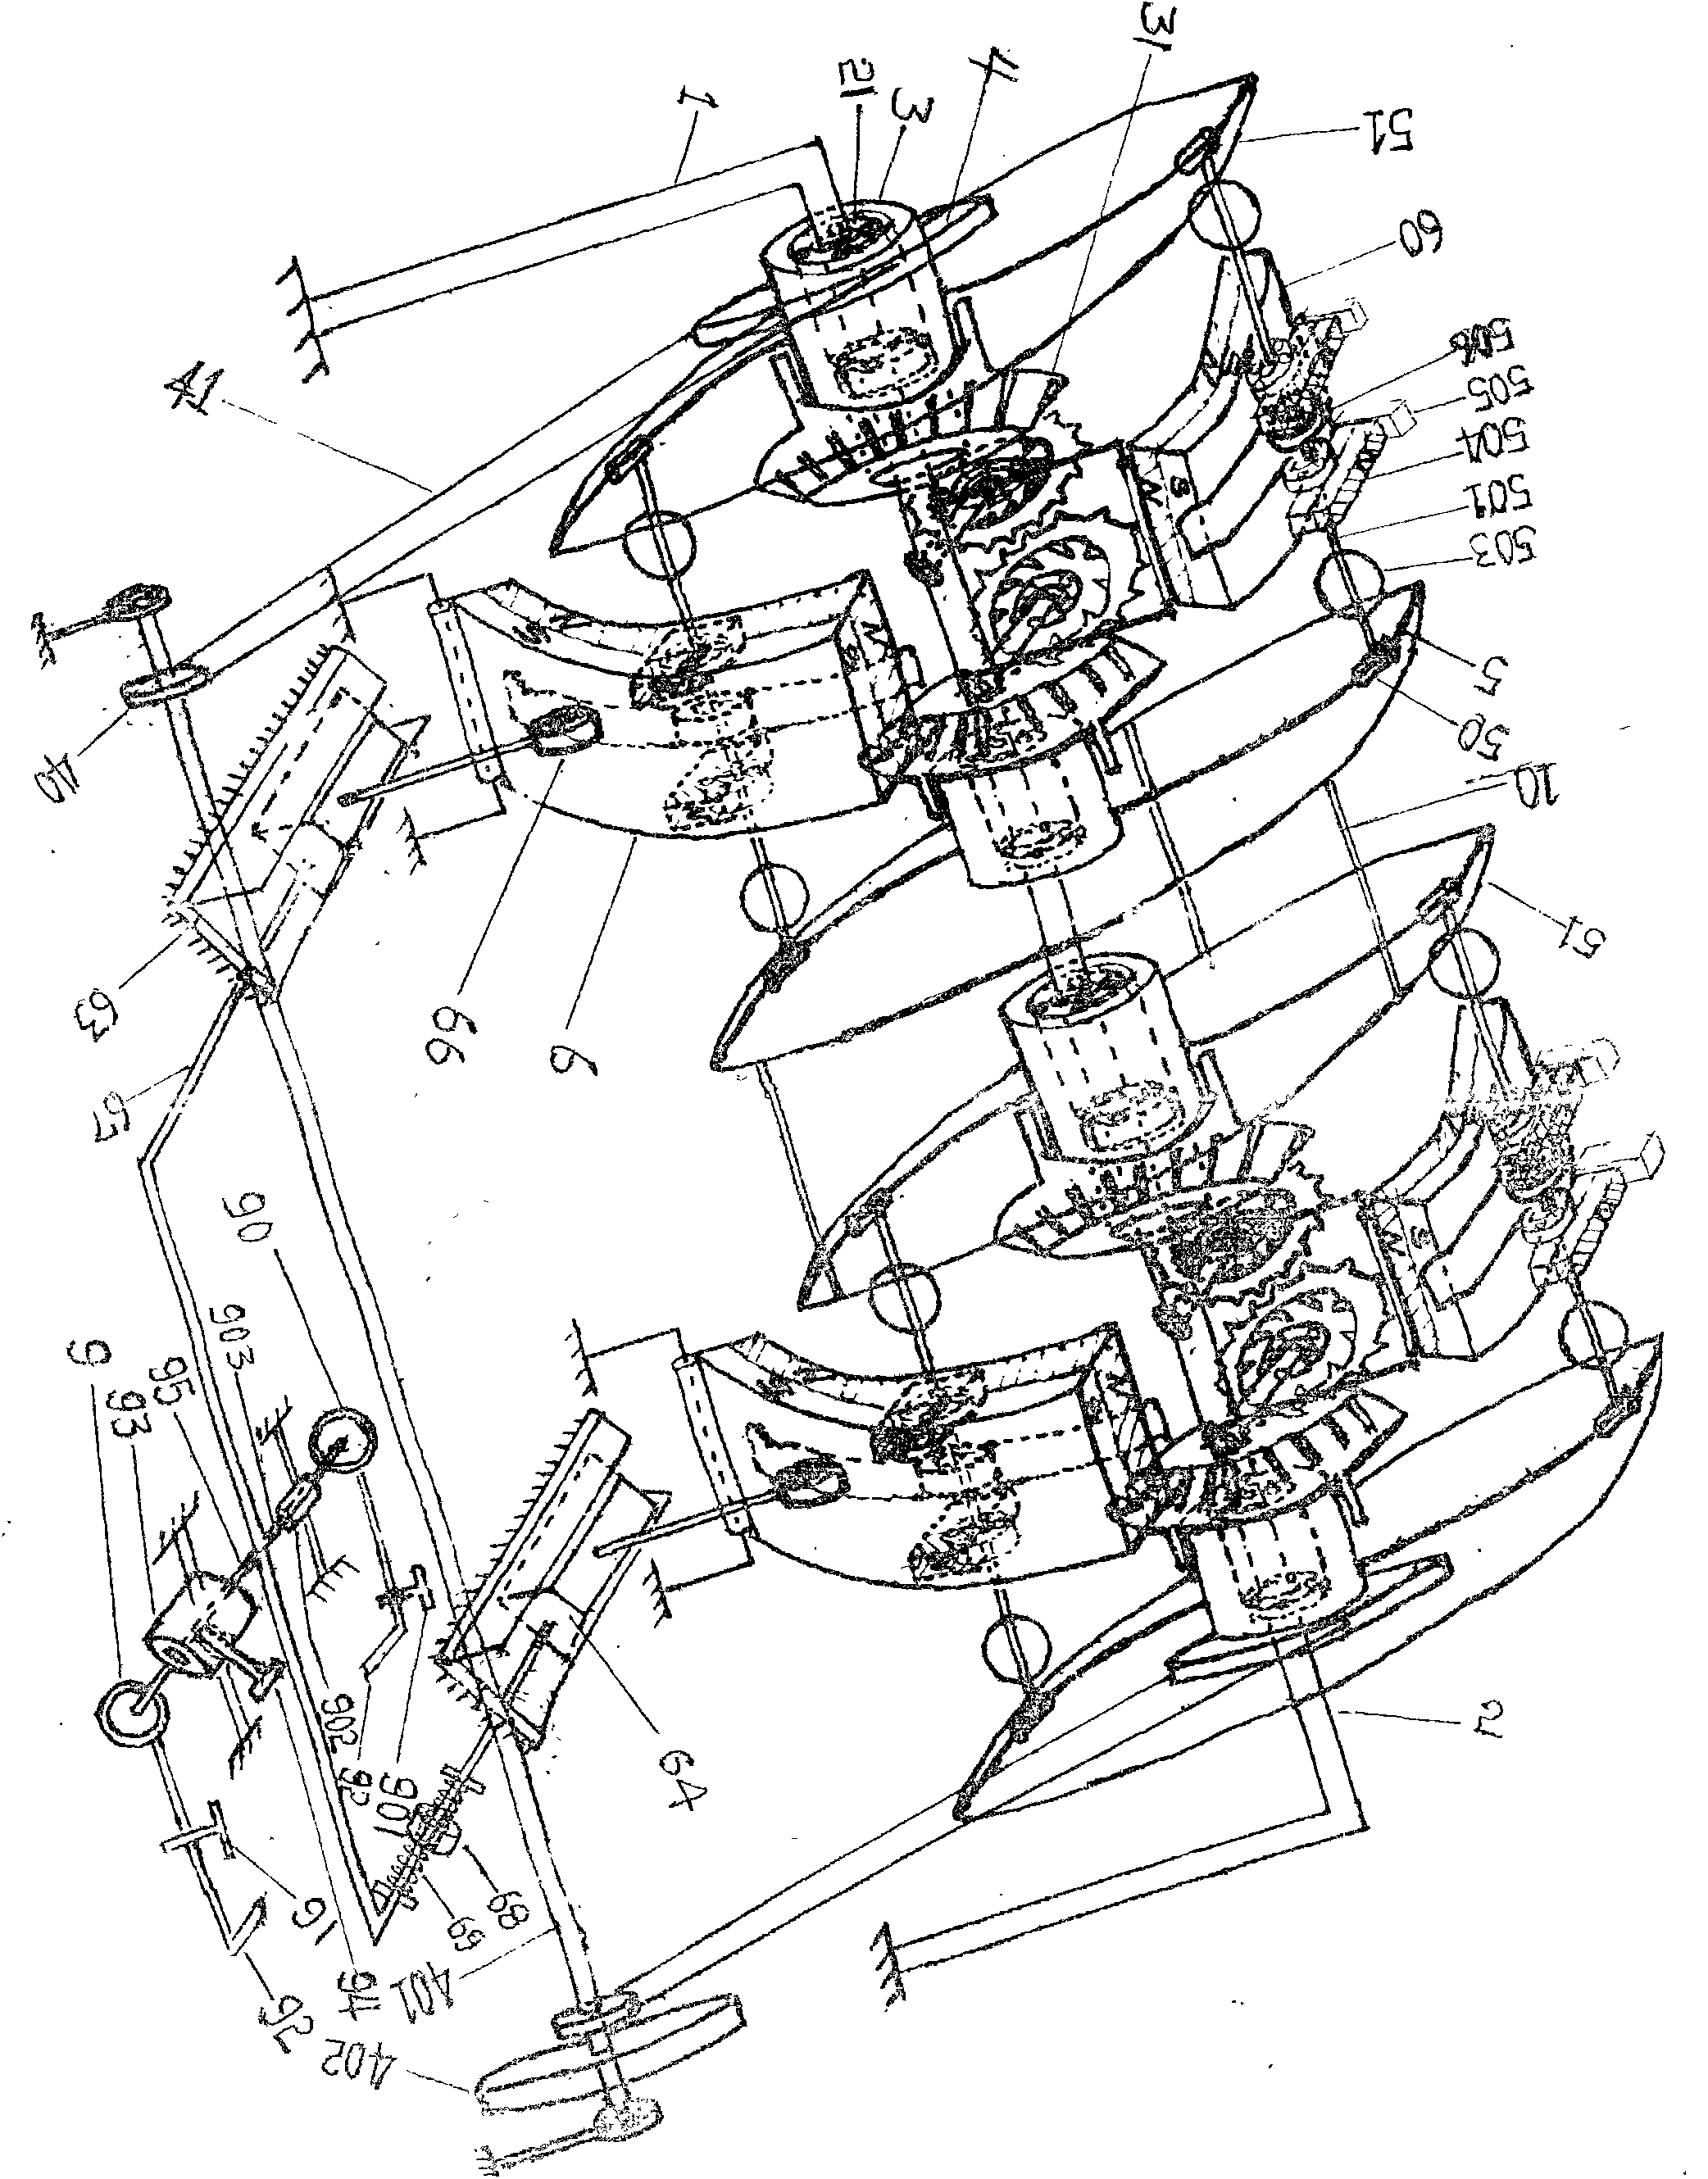 Eccentric engine using magnetic suspension object system time at same point in vertical surface